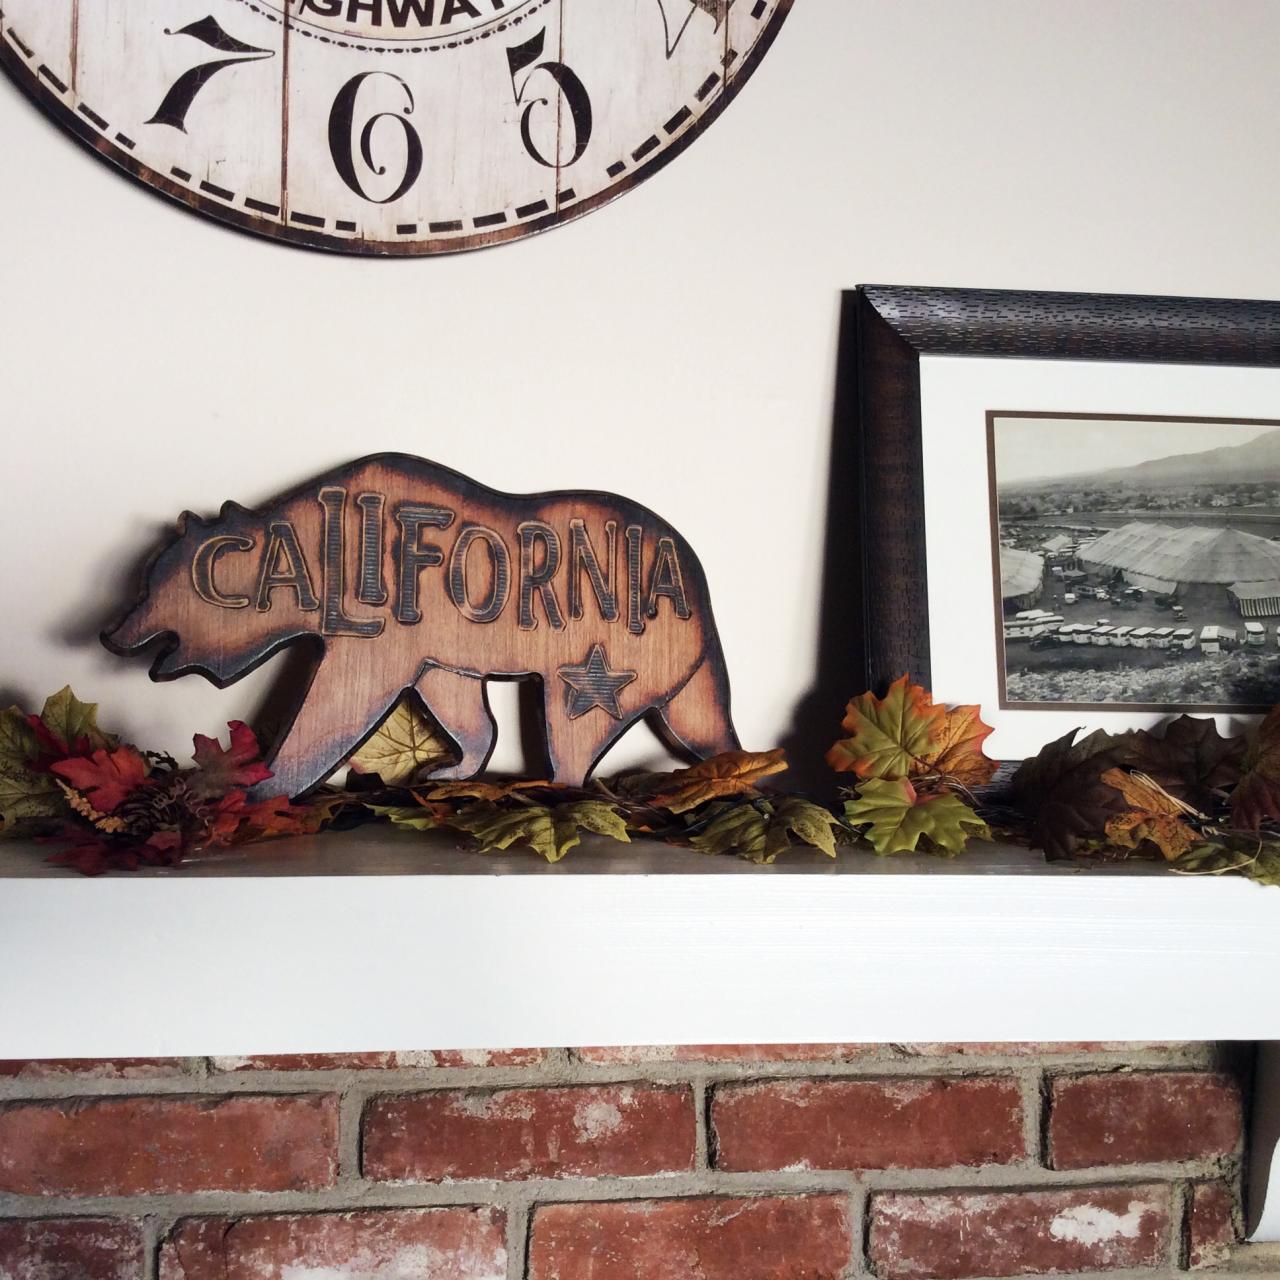 California Bear - Shelf And Mantle Decorations - Made With Cherry Wood